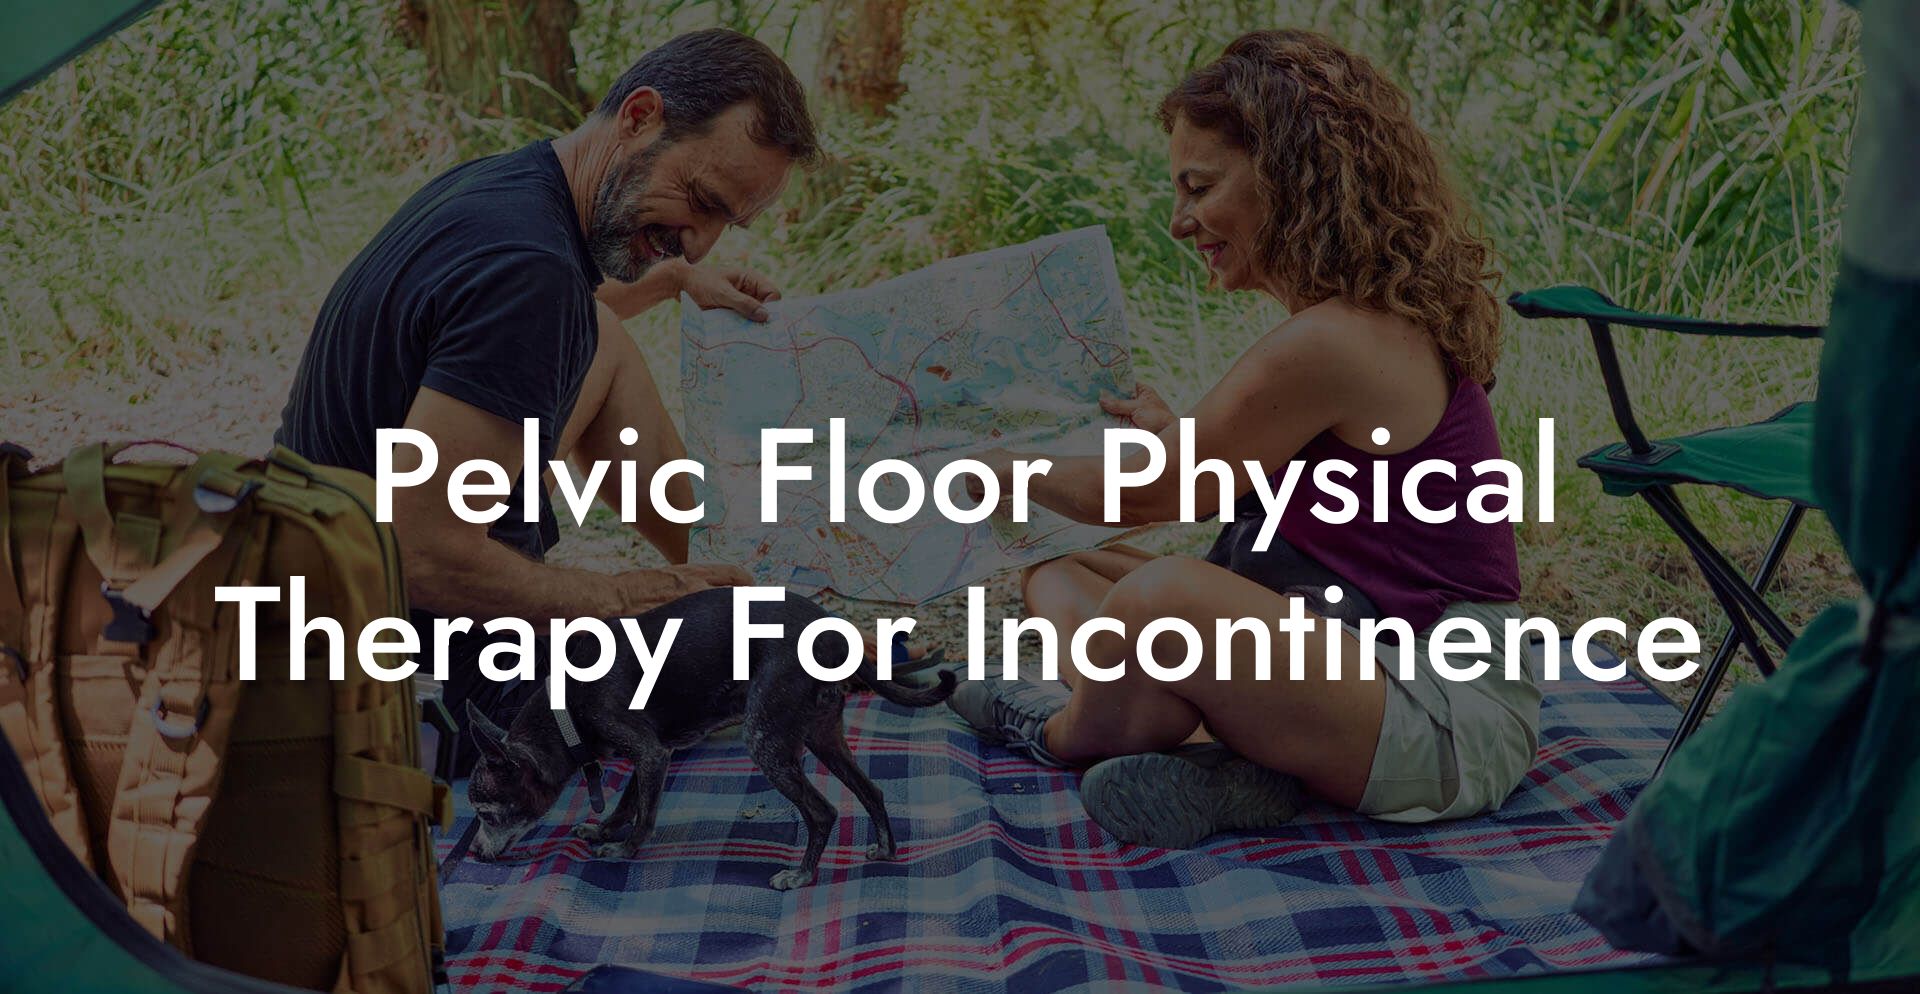 Pelvic Floor Physical Therapy For Incontinence